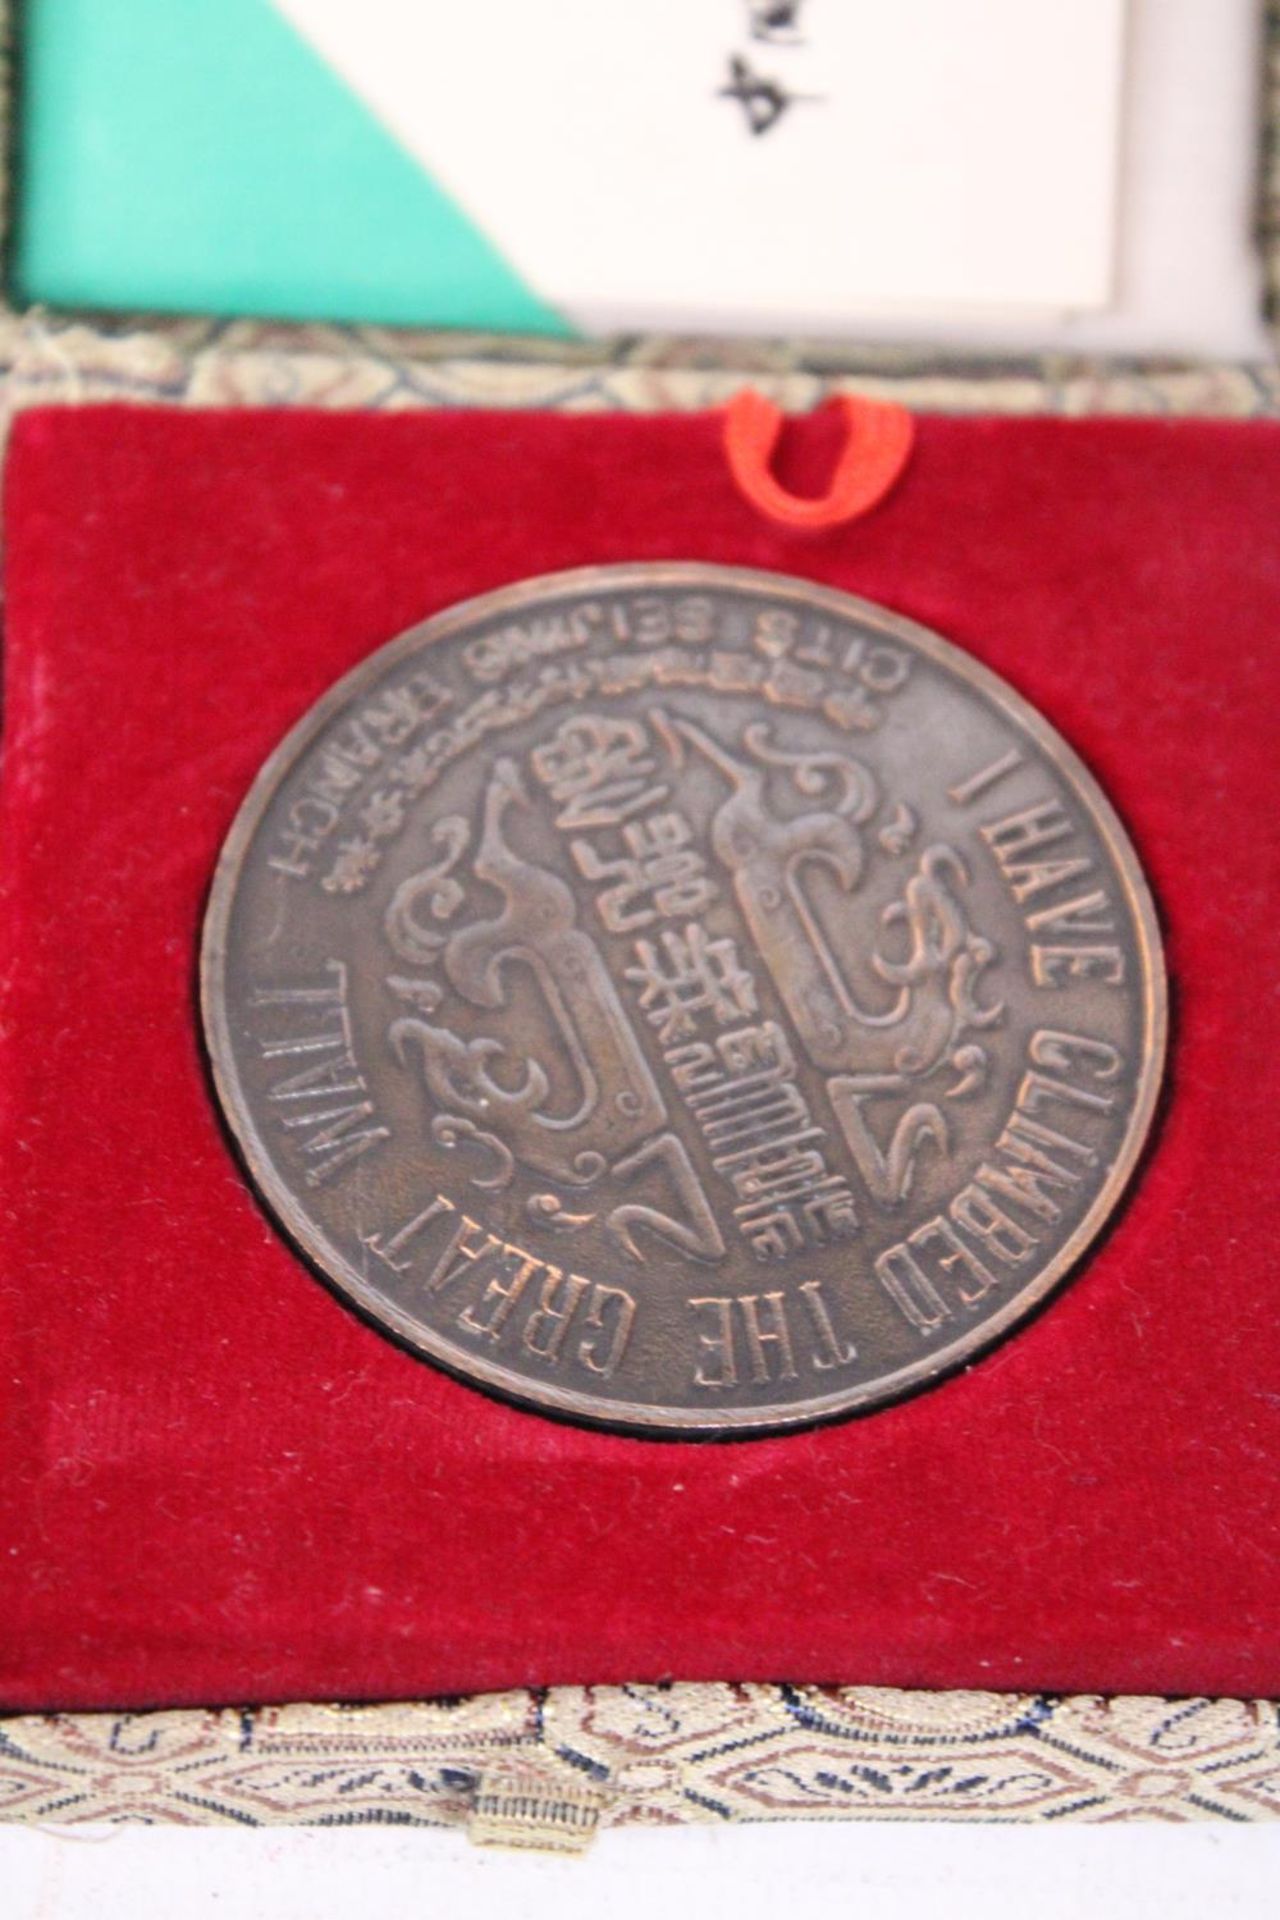 A BOXED BRONZE MEDAL "GREAT WALL OF CHINA" WITH A MINIATURE BUDDAH - Image 4 of 5